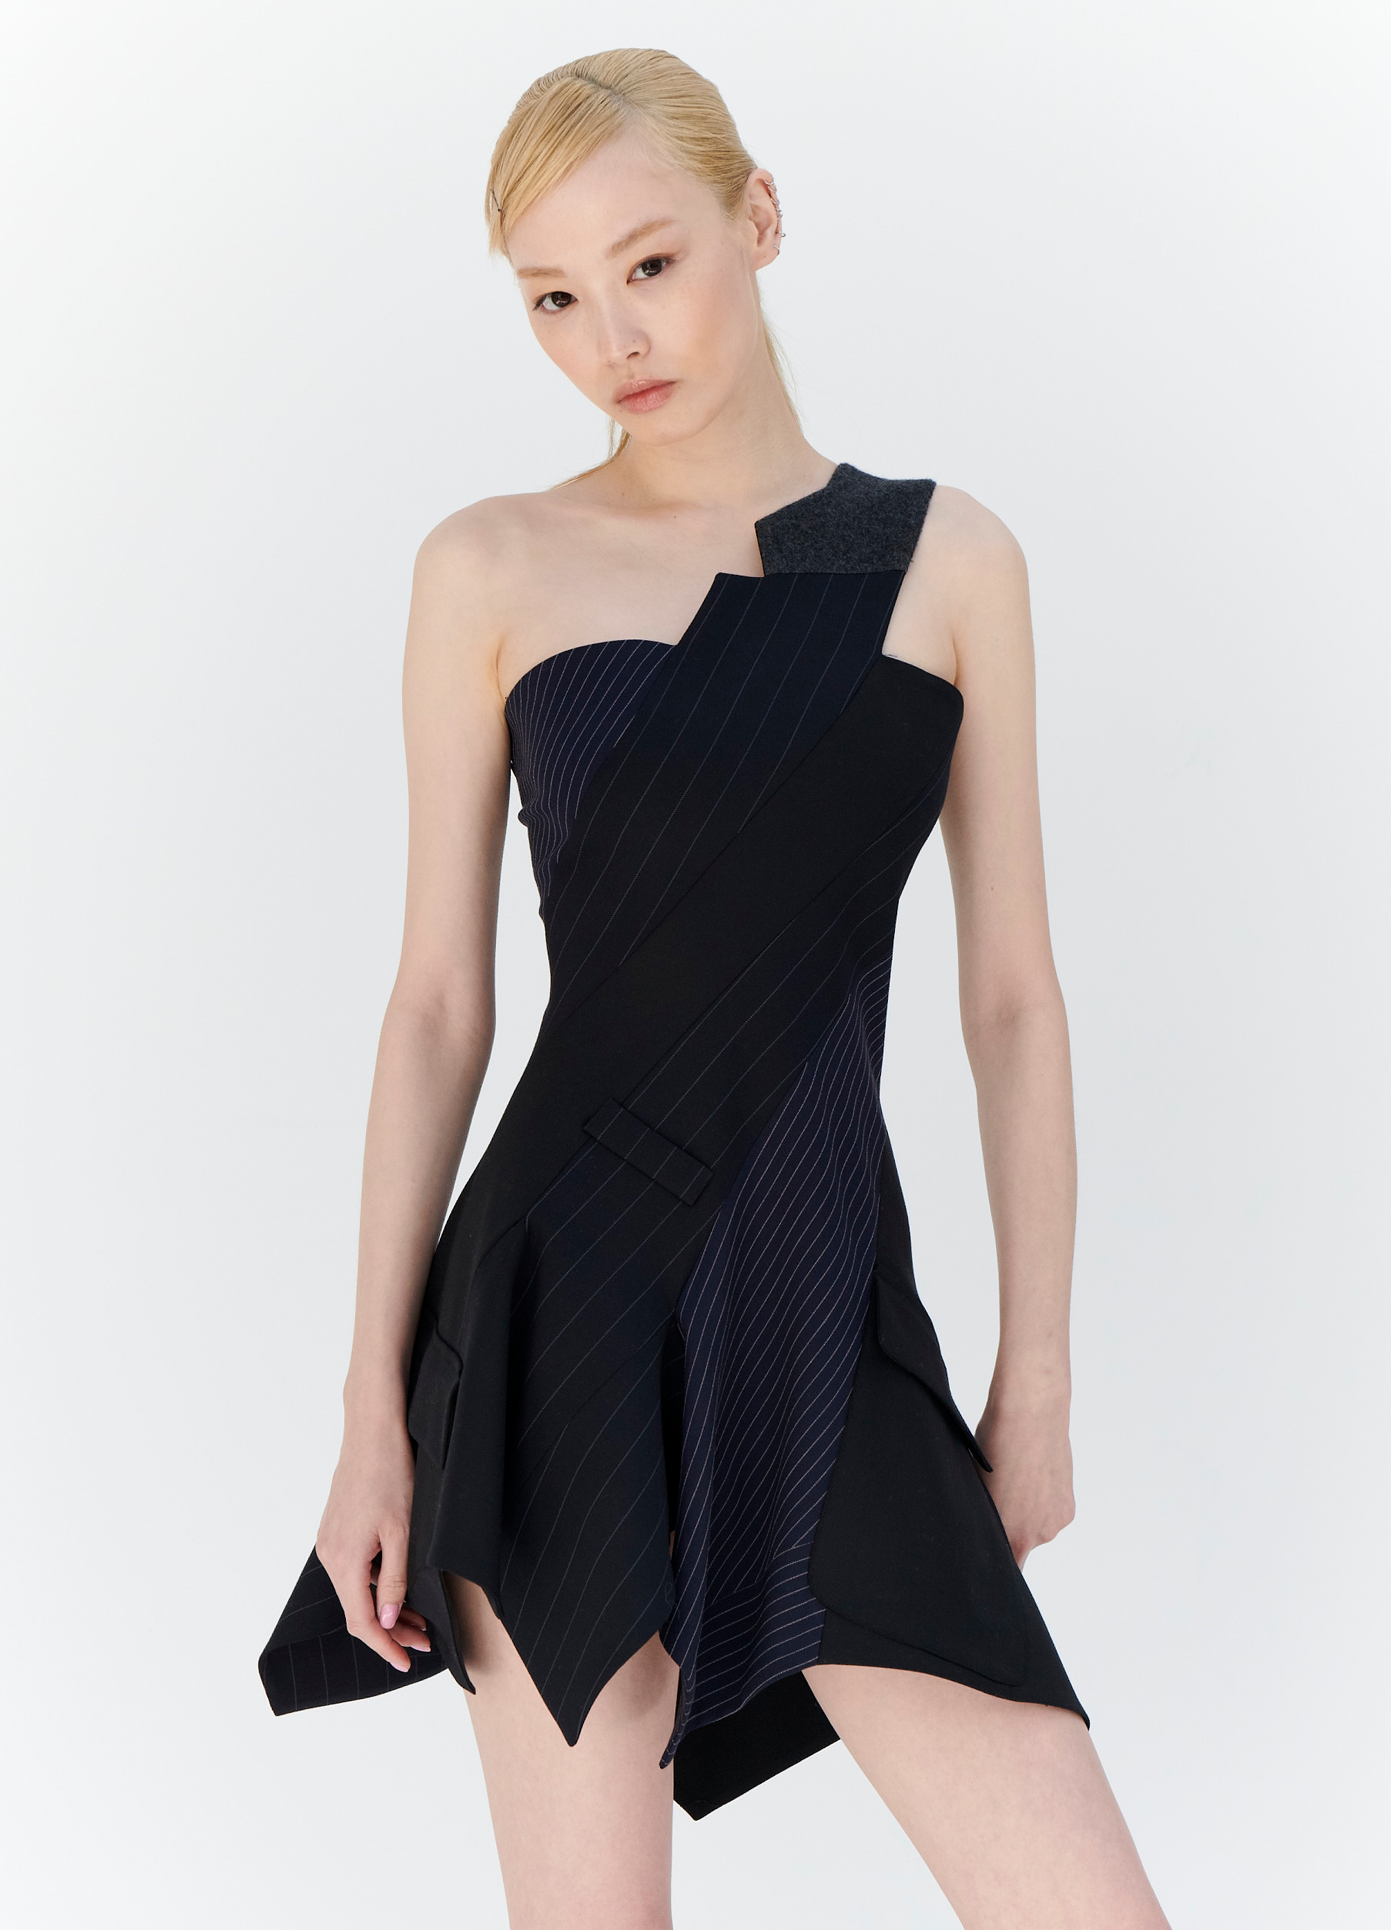 MONSE One Shoulder Tailored Dress in Midnight on model front view